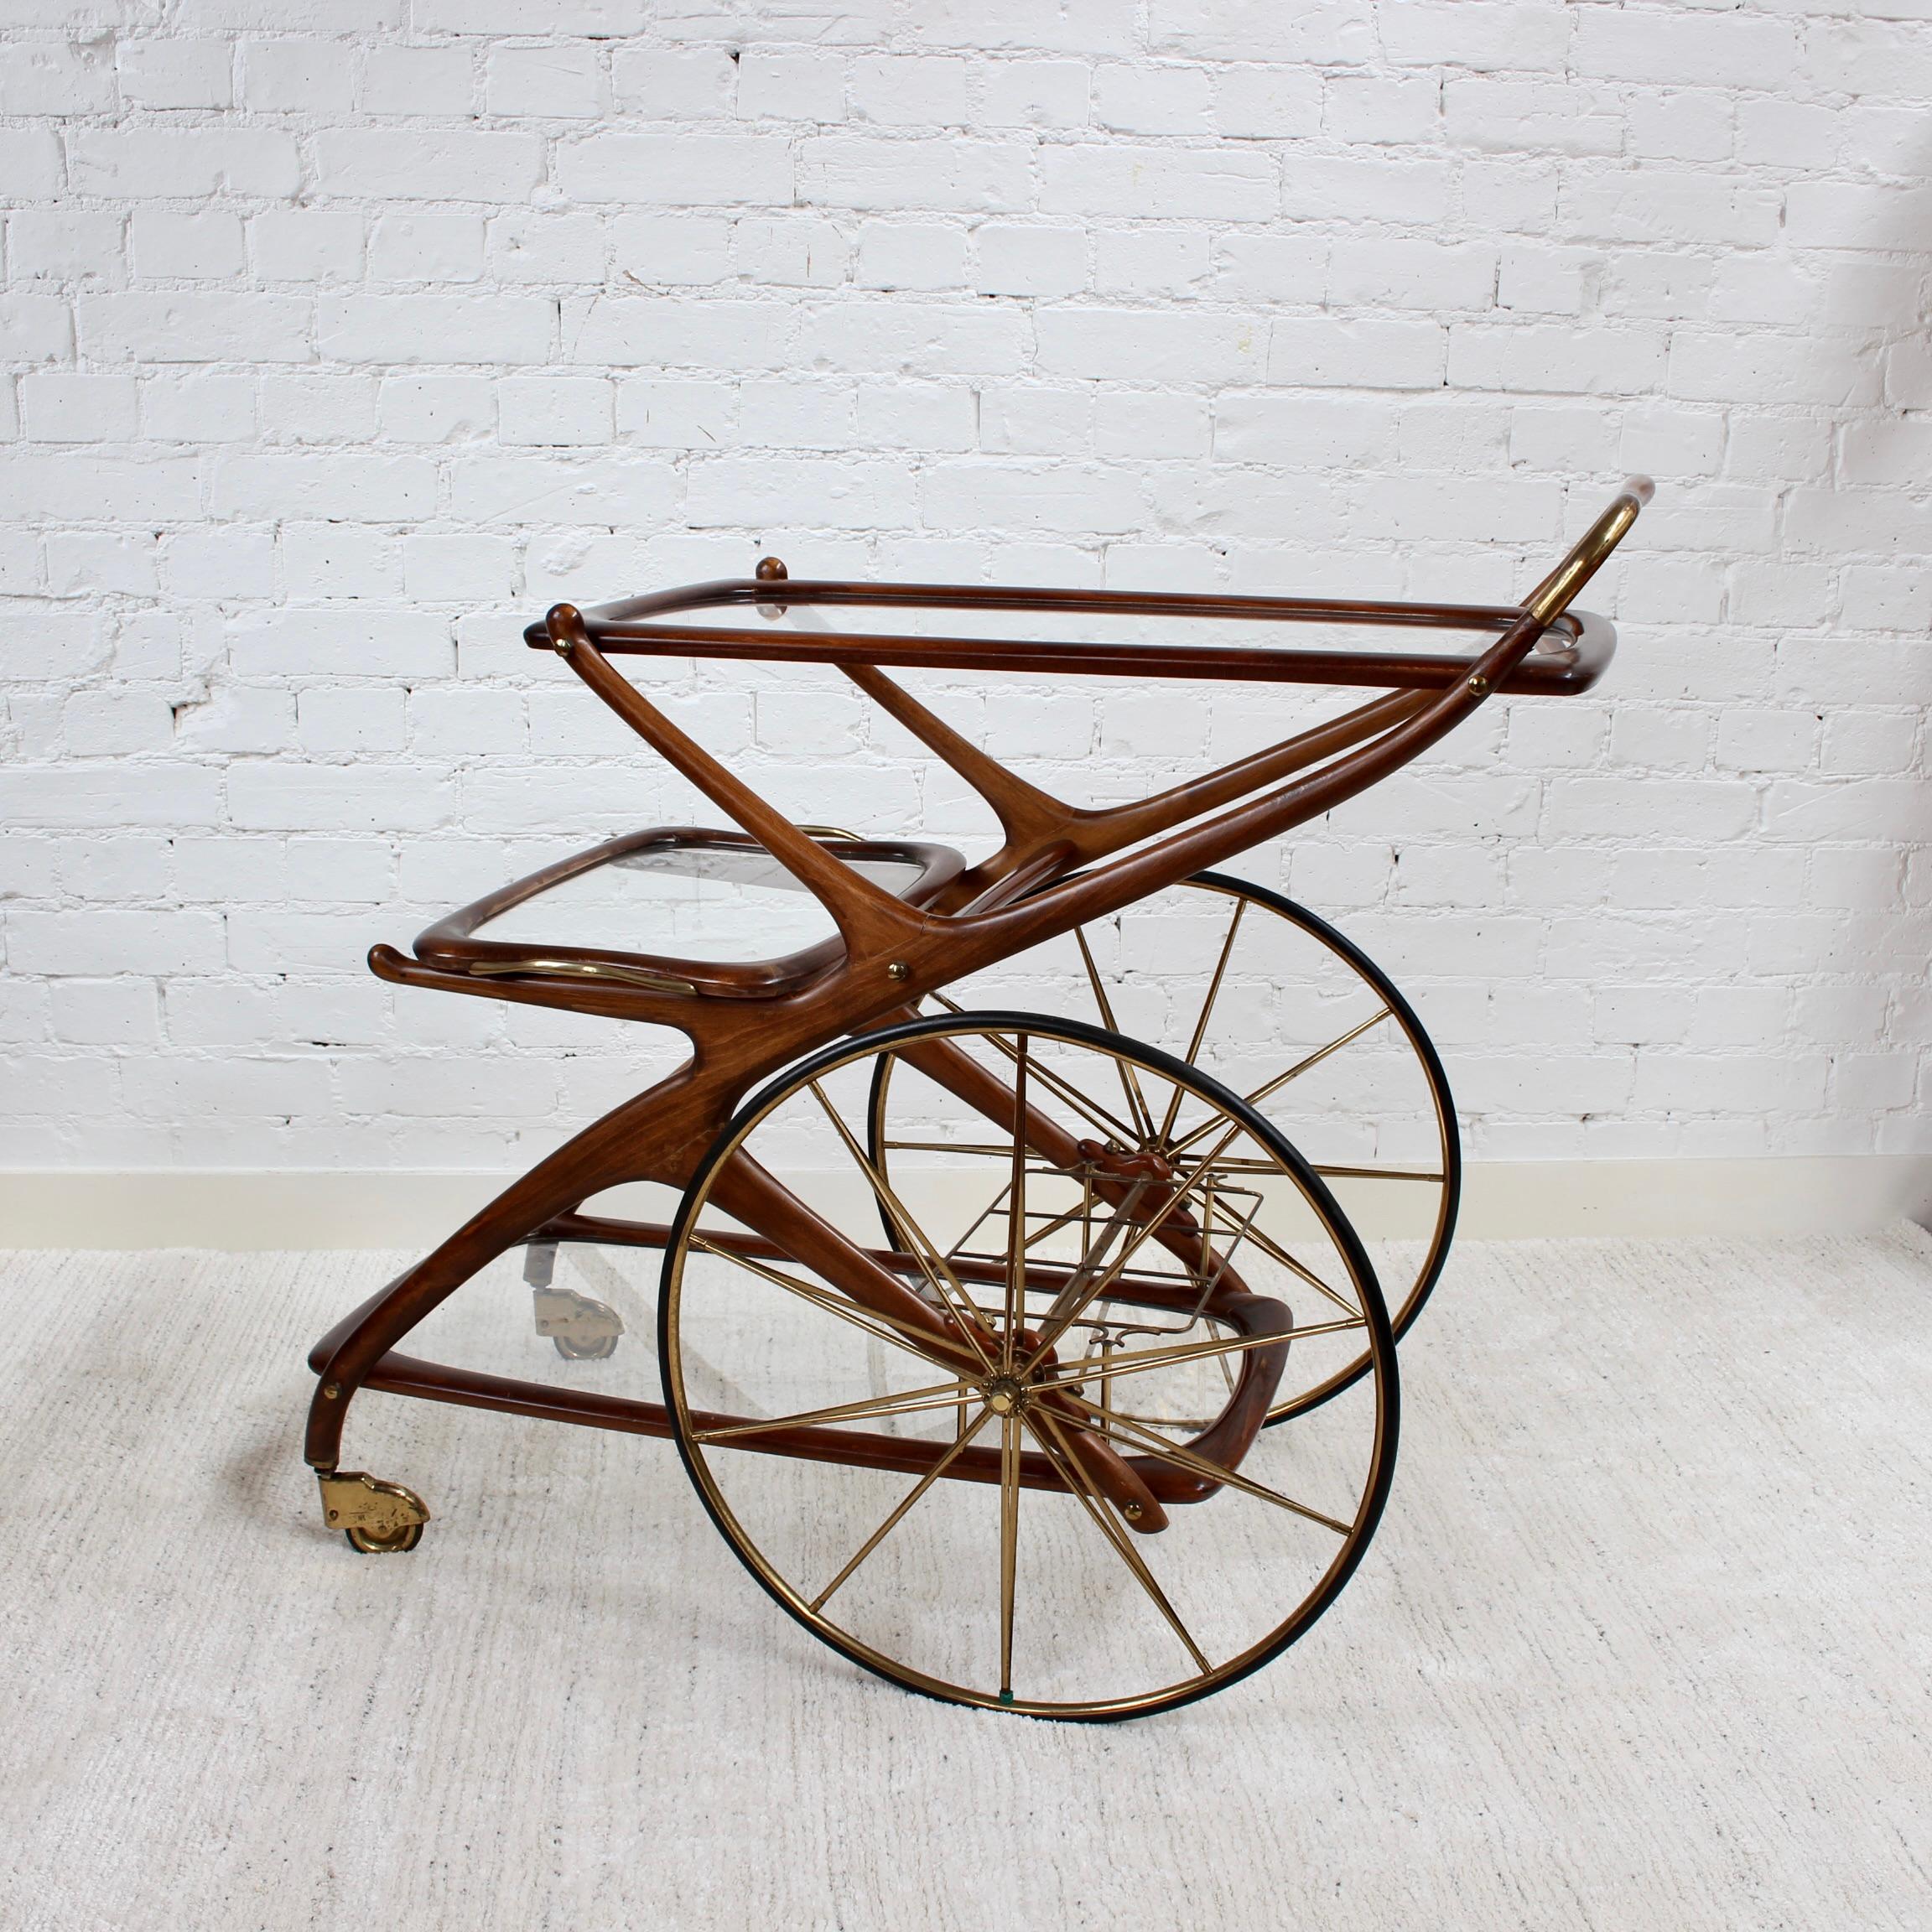 Vintage Italian serving trolley / bar cart (circa 1950s) by Cesare Lacca. Mid-century chic, Modern style and pure elegance in wood, brass and glass. Wheel your drinks and snacks out in style on this elegantly attractive piece of design history.